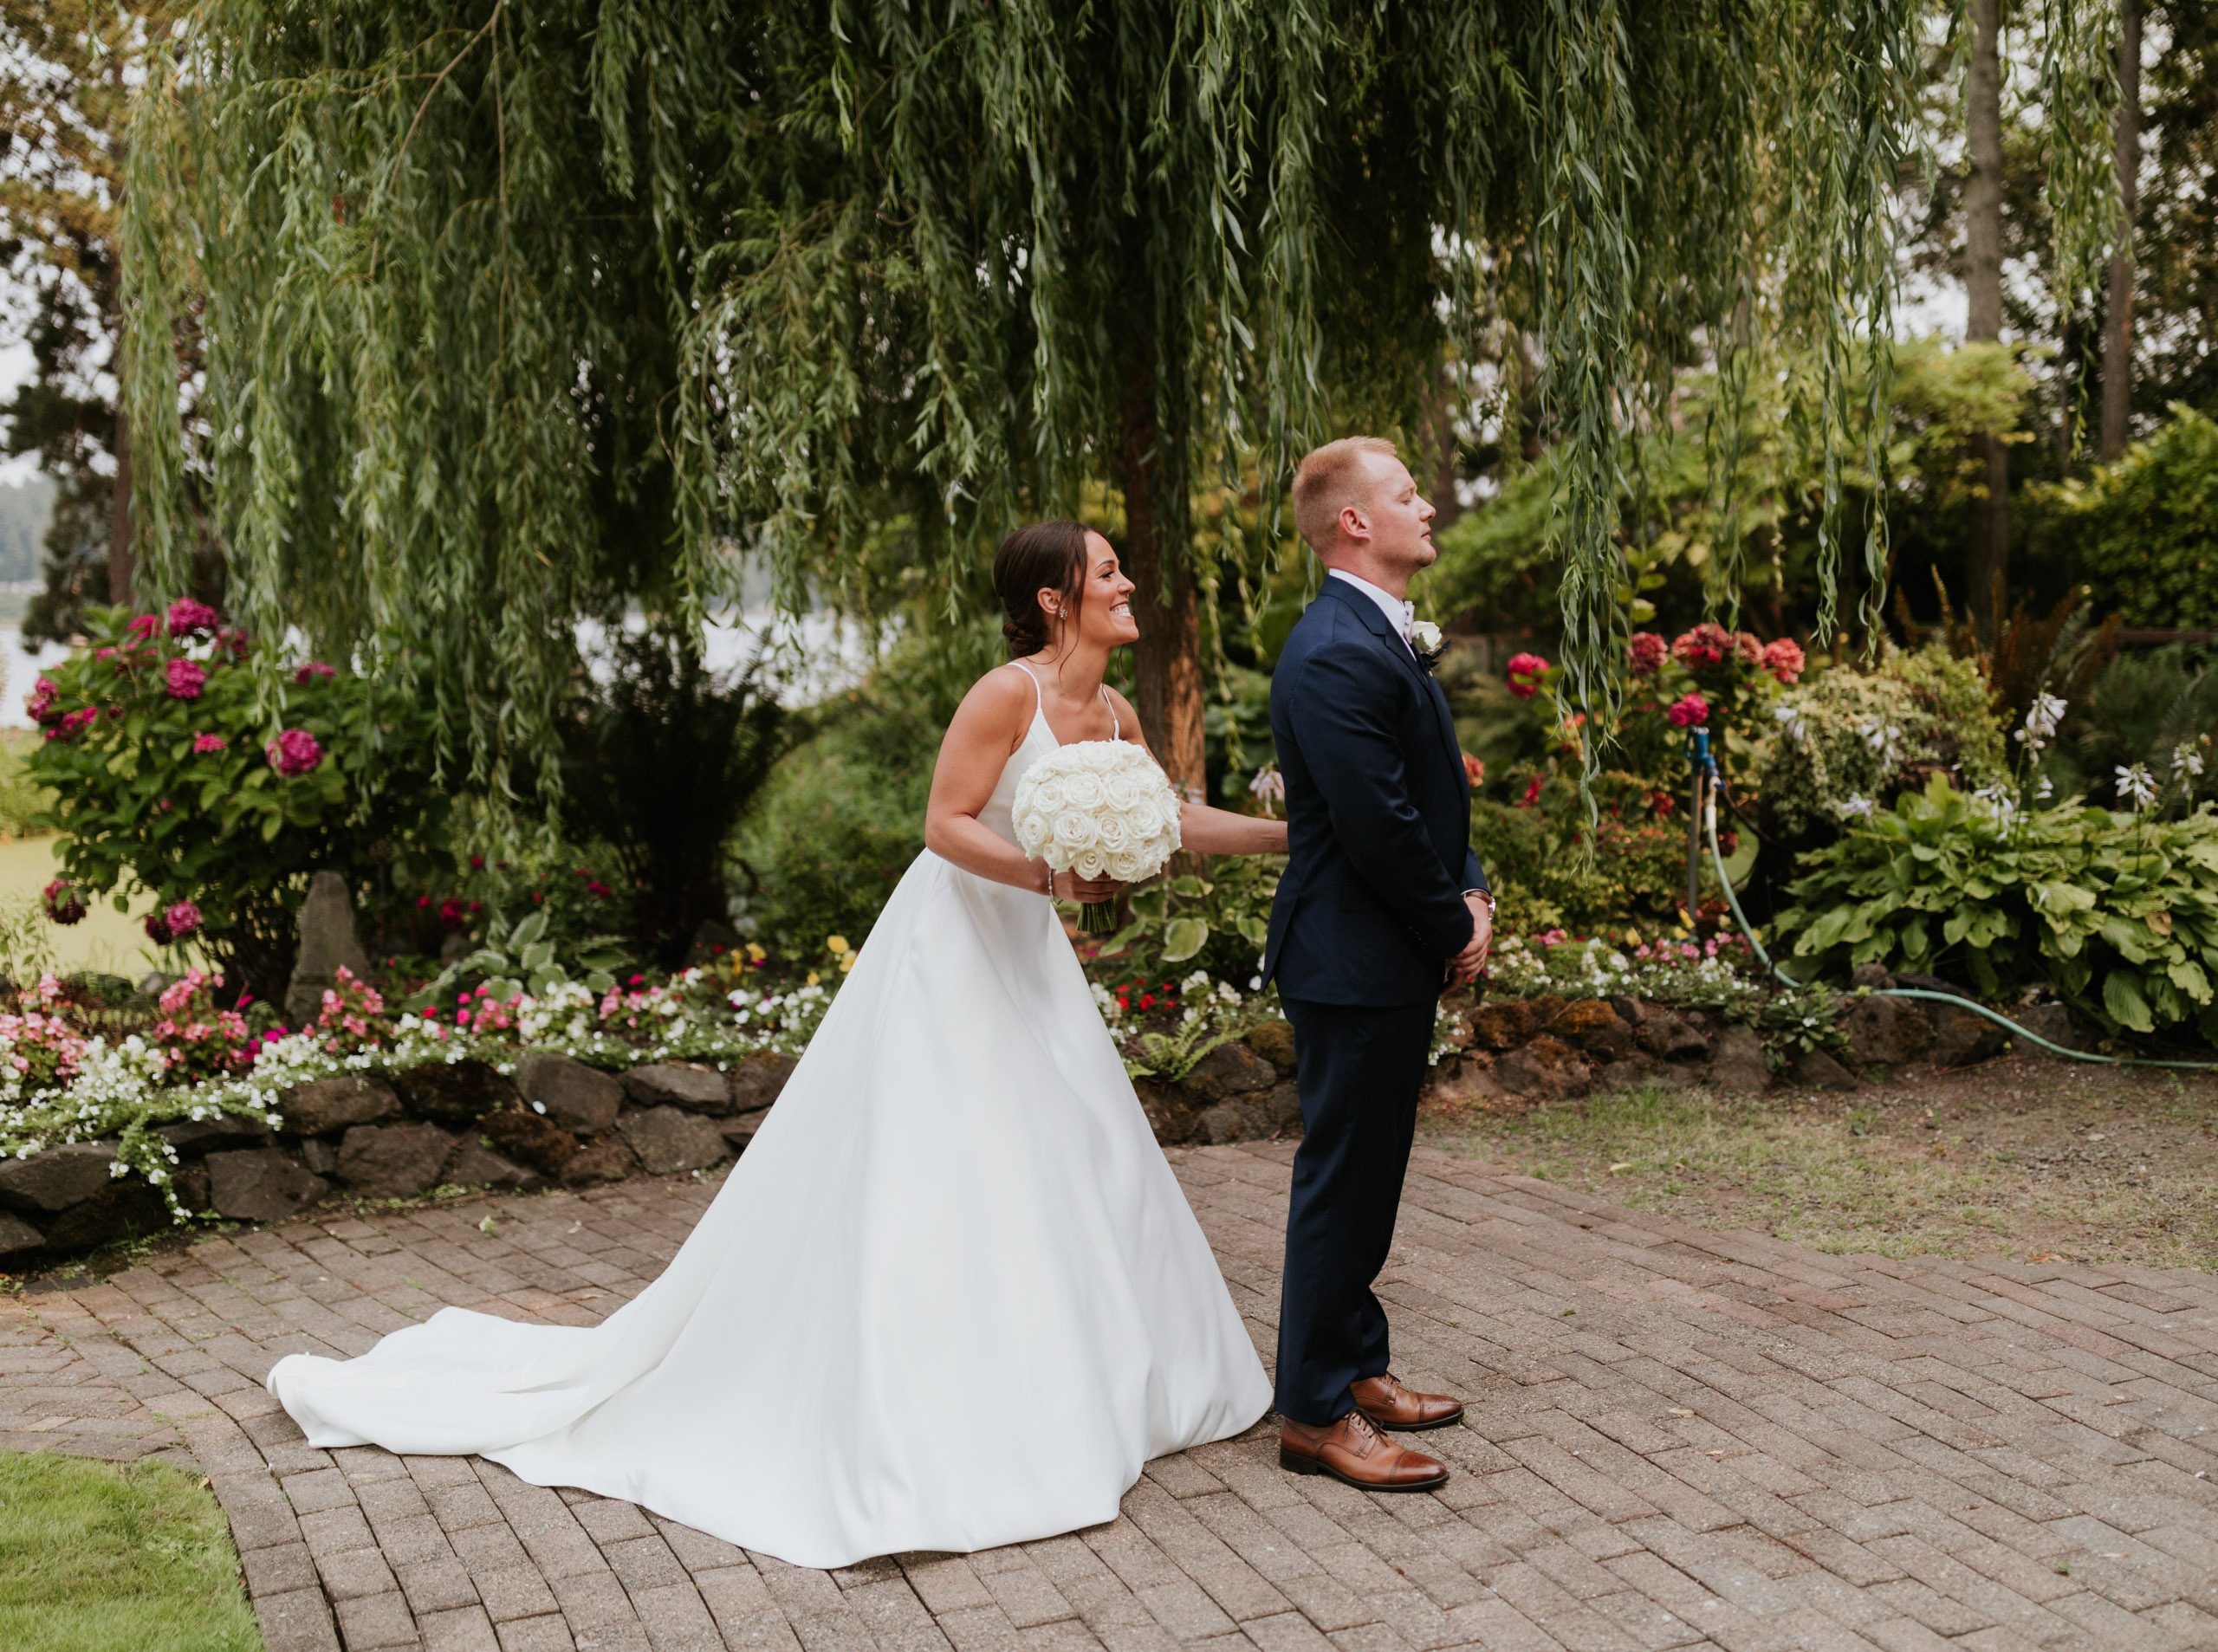 https://breannapluskevin.com/wp-content/uploads/photo-gallery/imported_from_media_libray/kiana-lodge-wedding-bm-breanna-plus-kevin-11.jpg